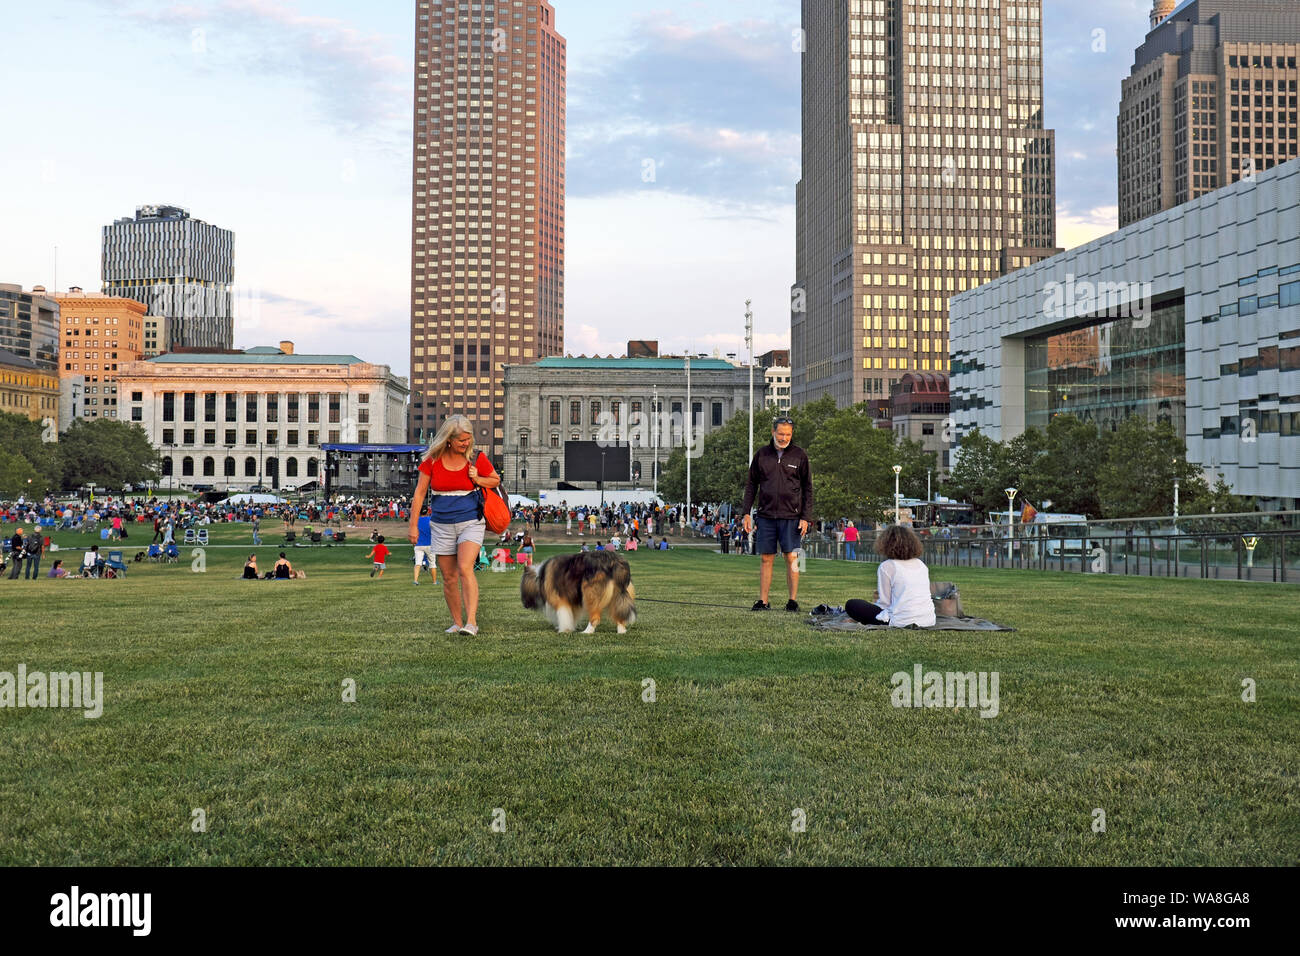 Summertime events in downtown Cleveland, like the Cleveland Orchestra, draw crowds to the grassy knoll, Mall B, to the outdoors and weather. Stock Photo